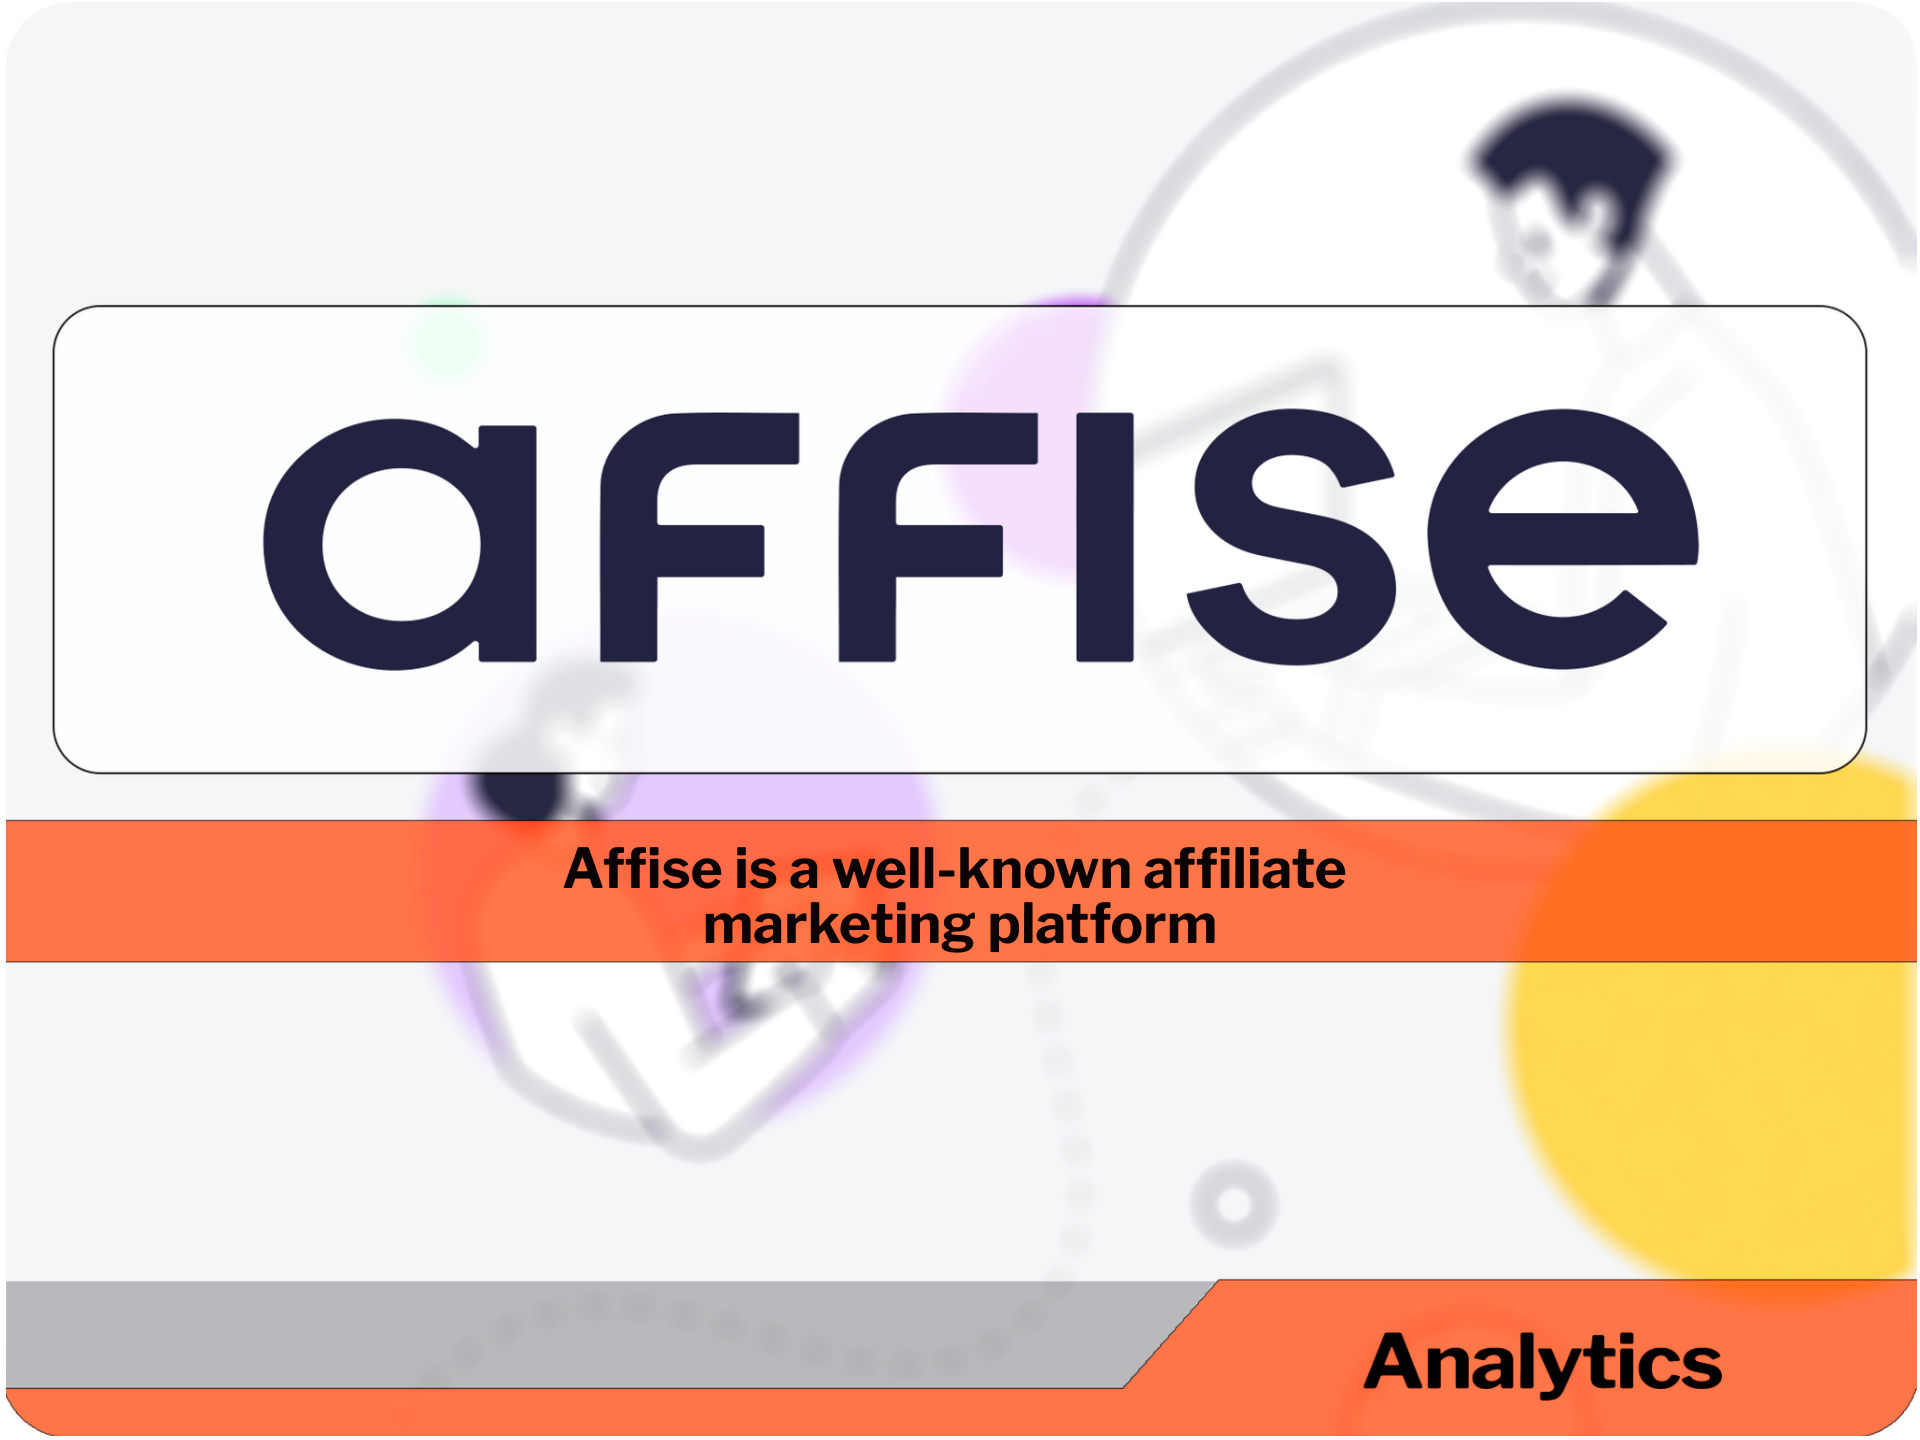 Affise is a well-known affiliate marketing platform